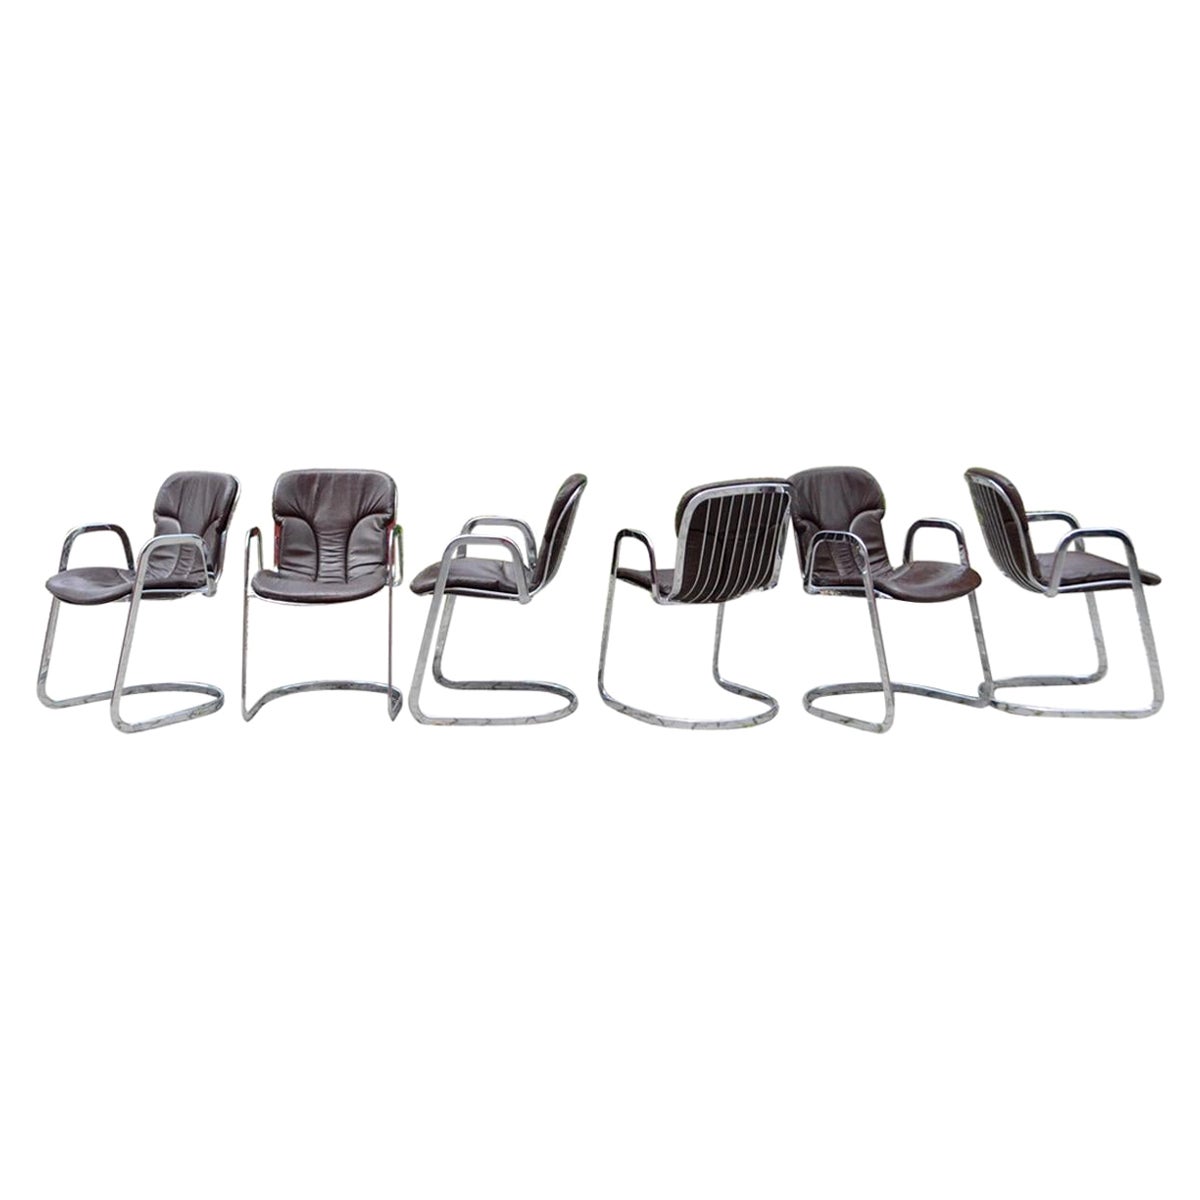 Cidue Dining Armchairs Chairs Set of 6 Chrome and Leather